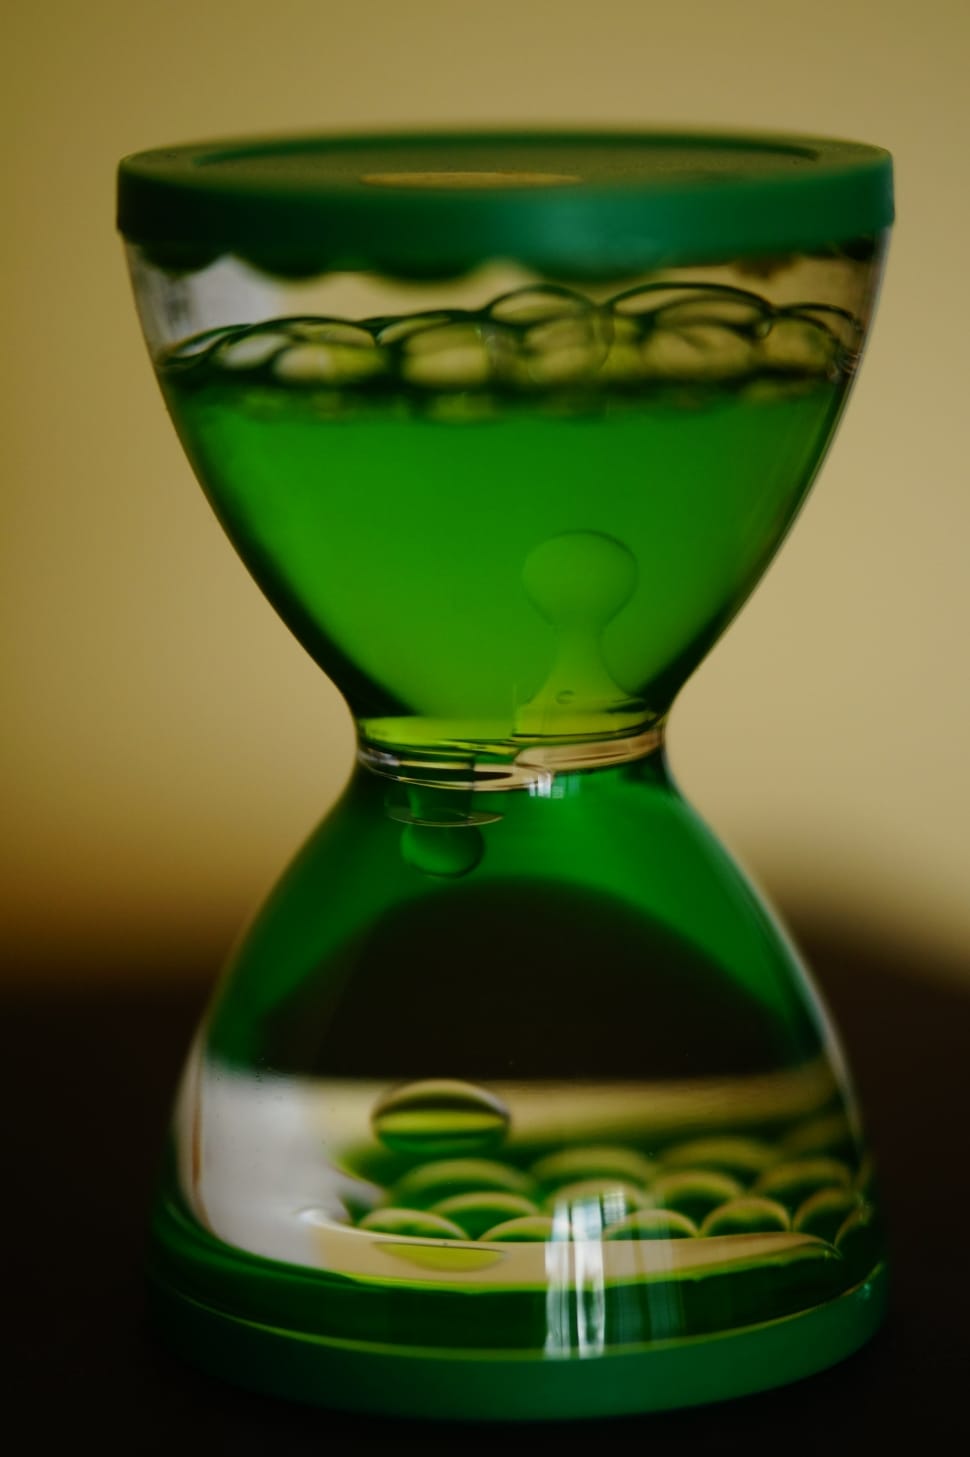 green tinted hourglass design ornament preview